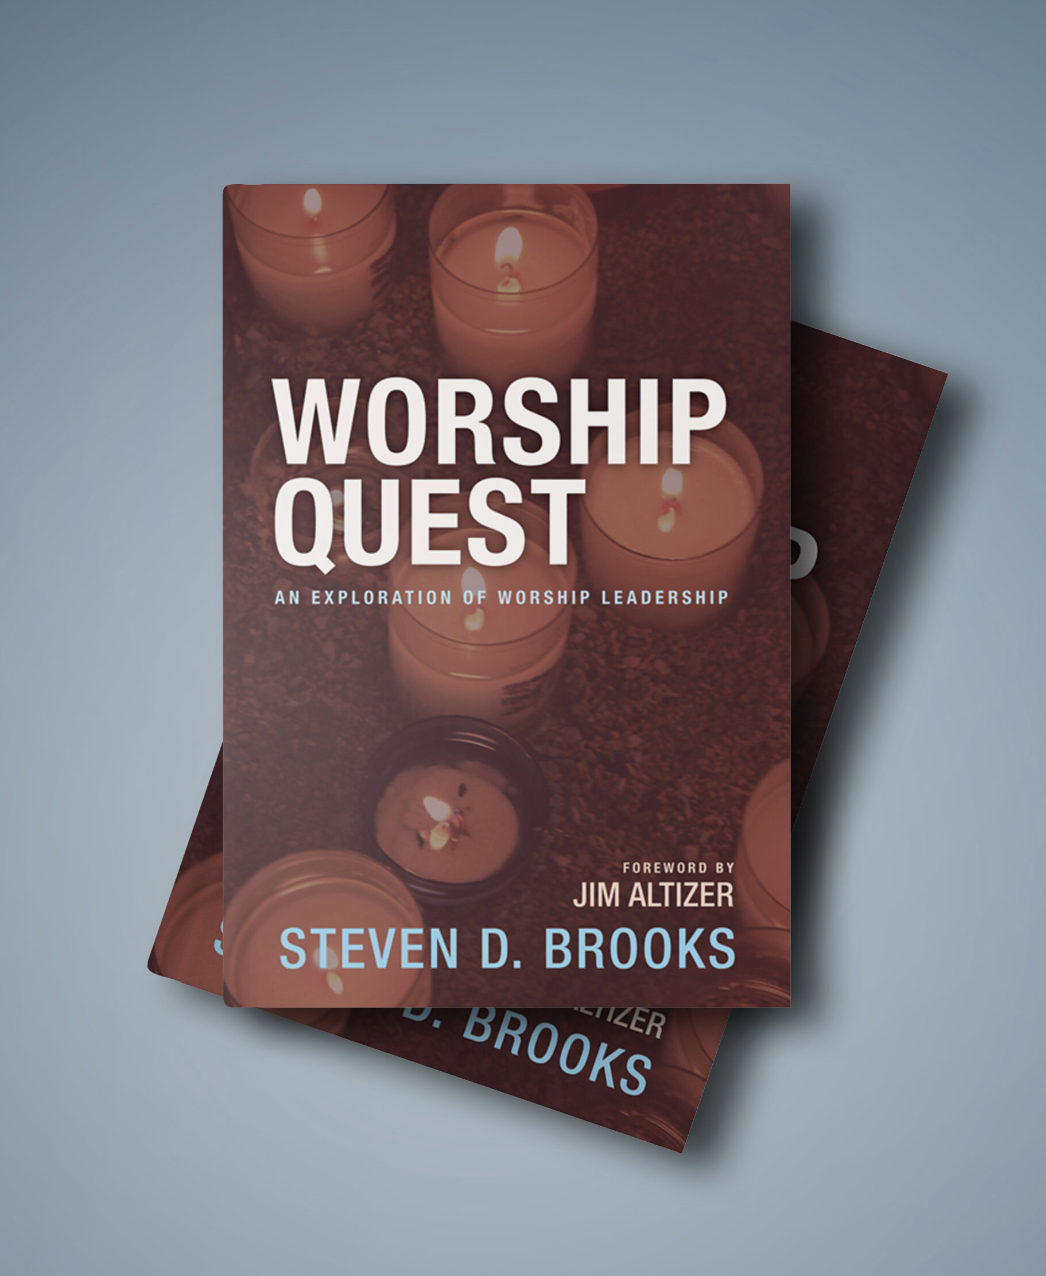 WORSHIP QUEST